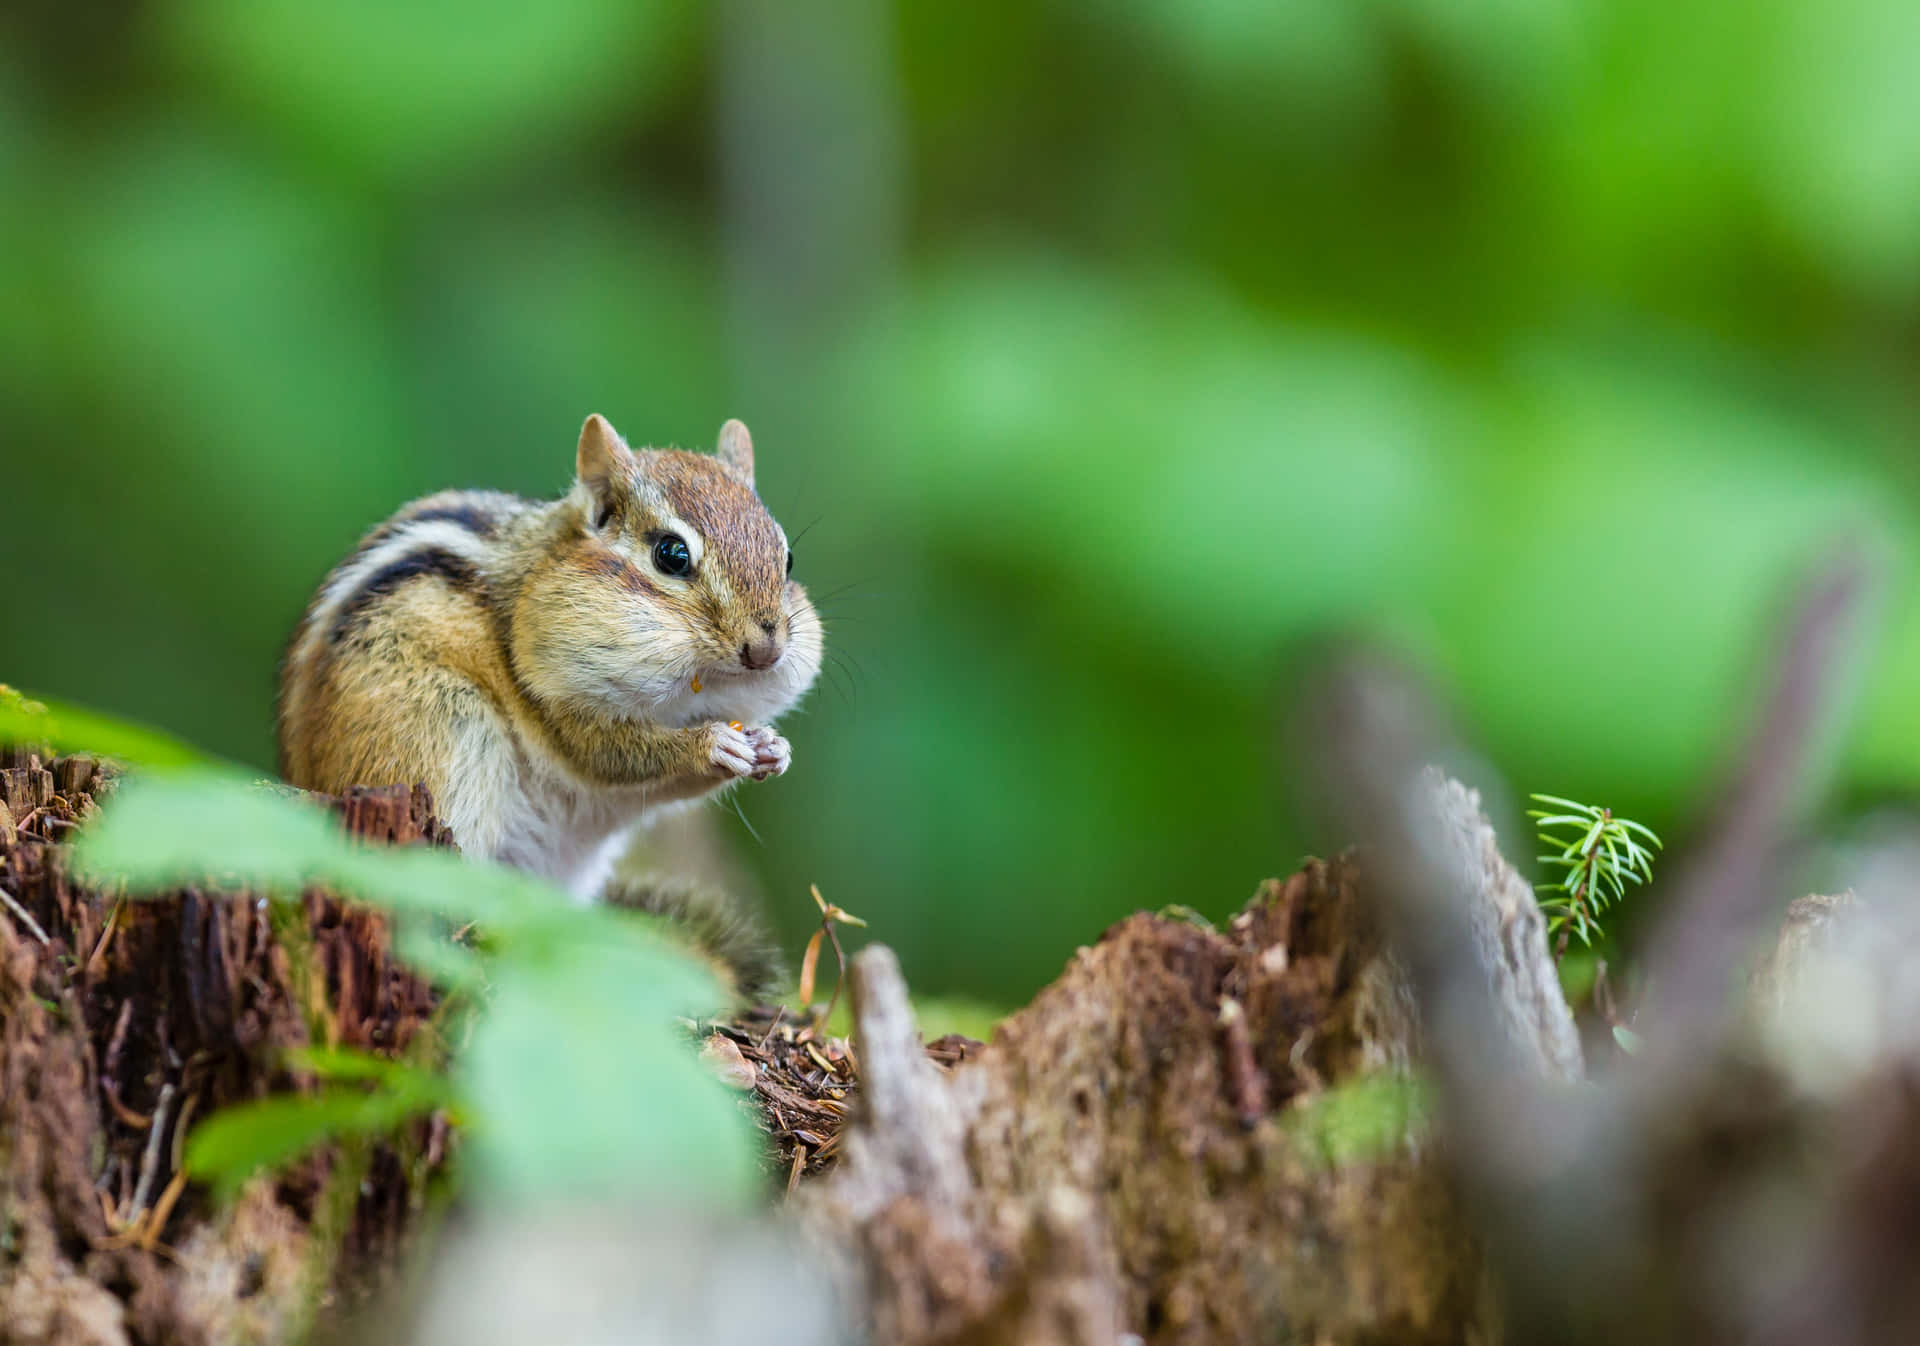 Chipmunk Against Blurred Leaves Picture